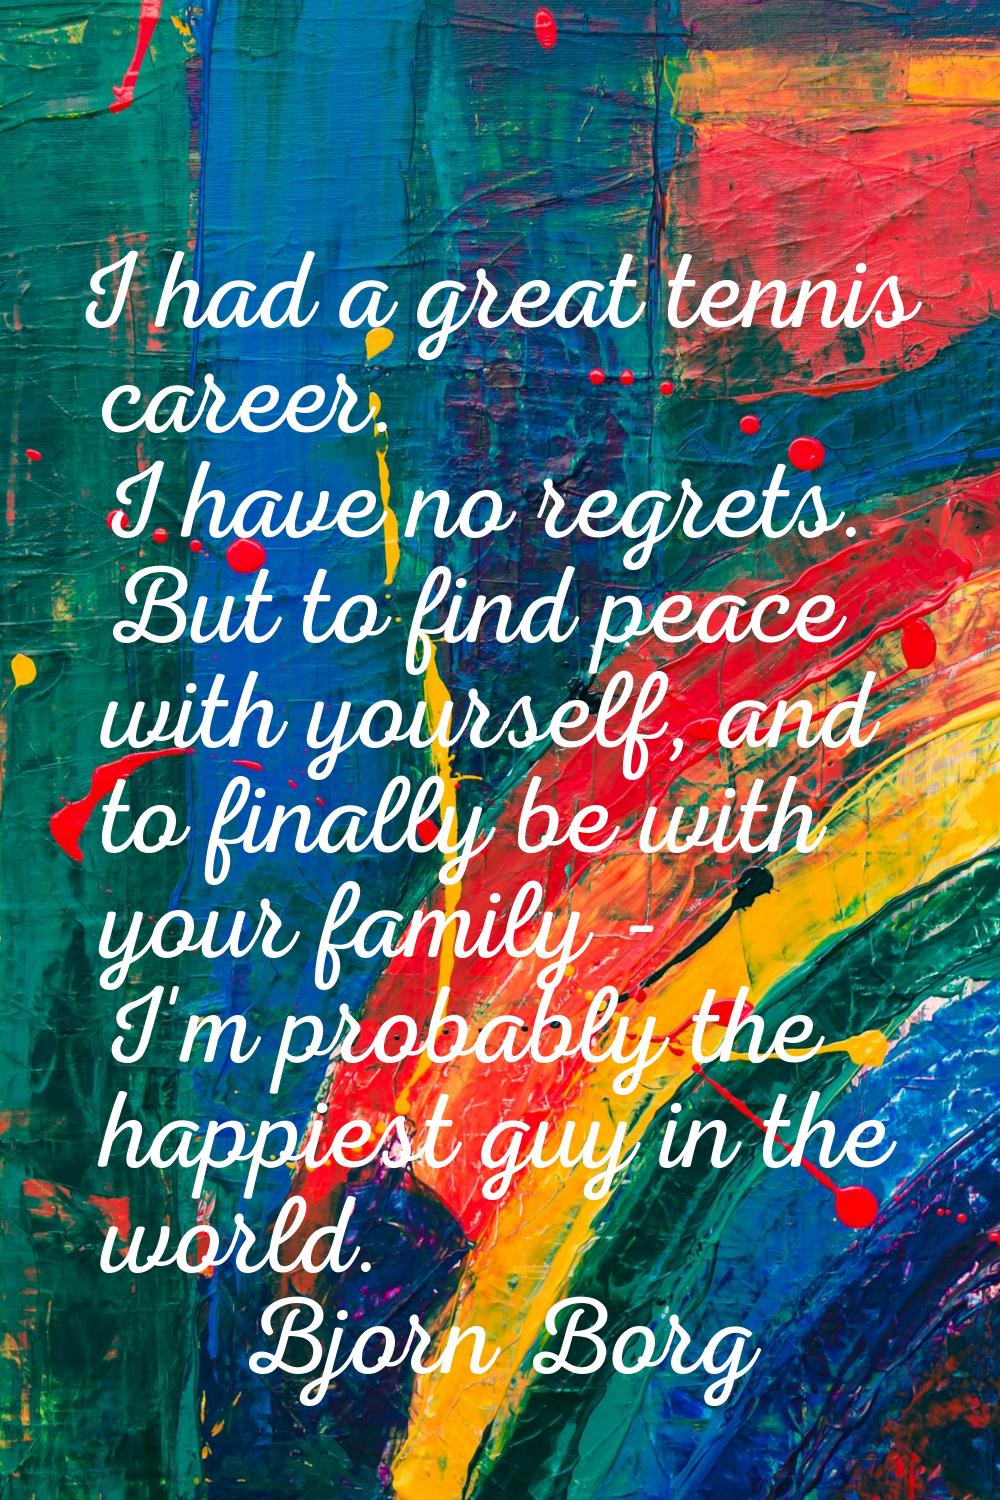 I had a great tennis career. I have no regrets. But to find peace with yourself, and to finally be 